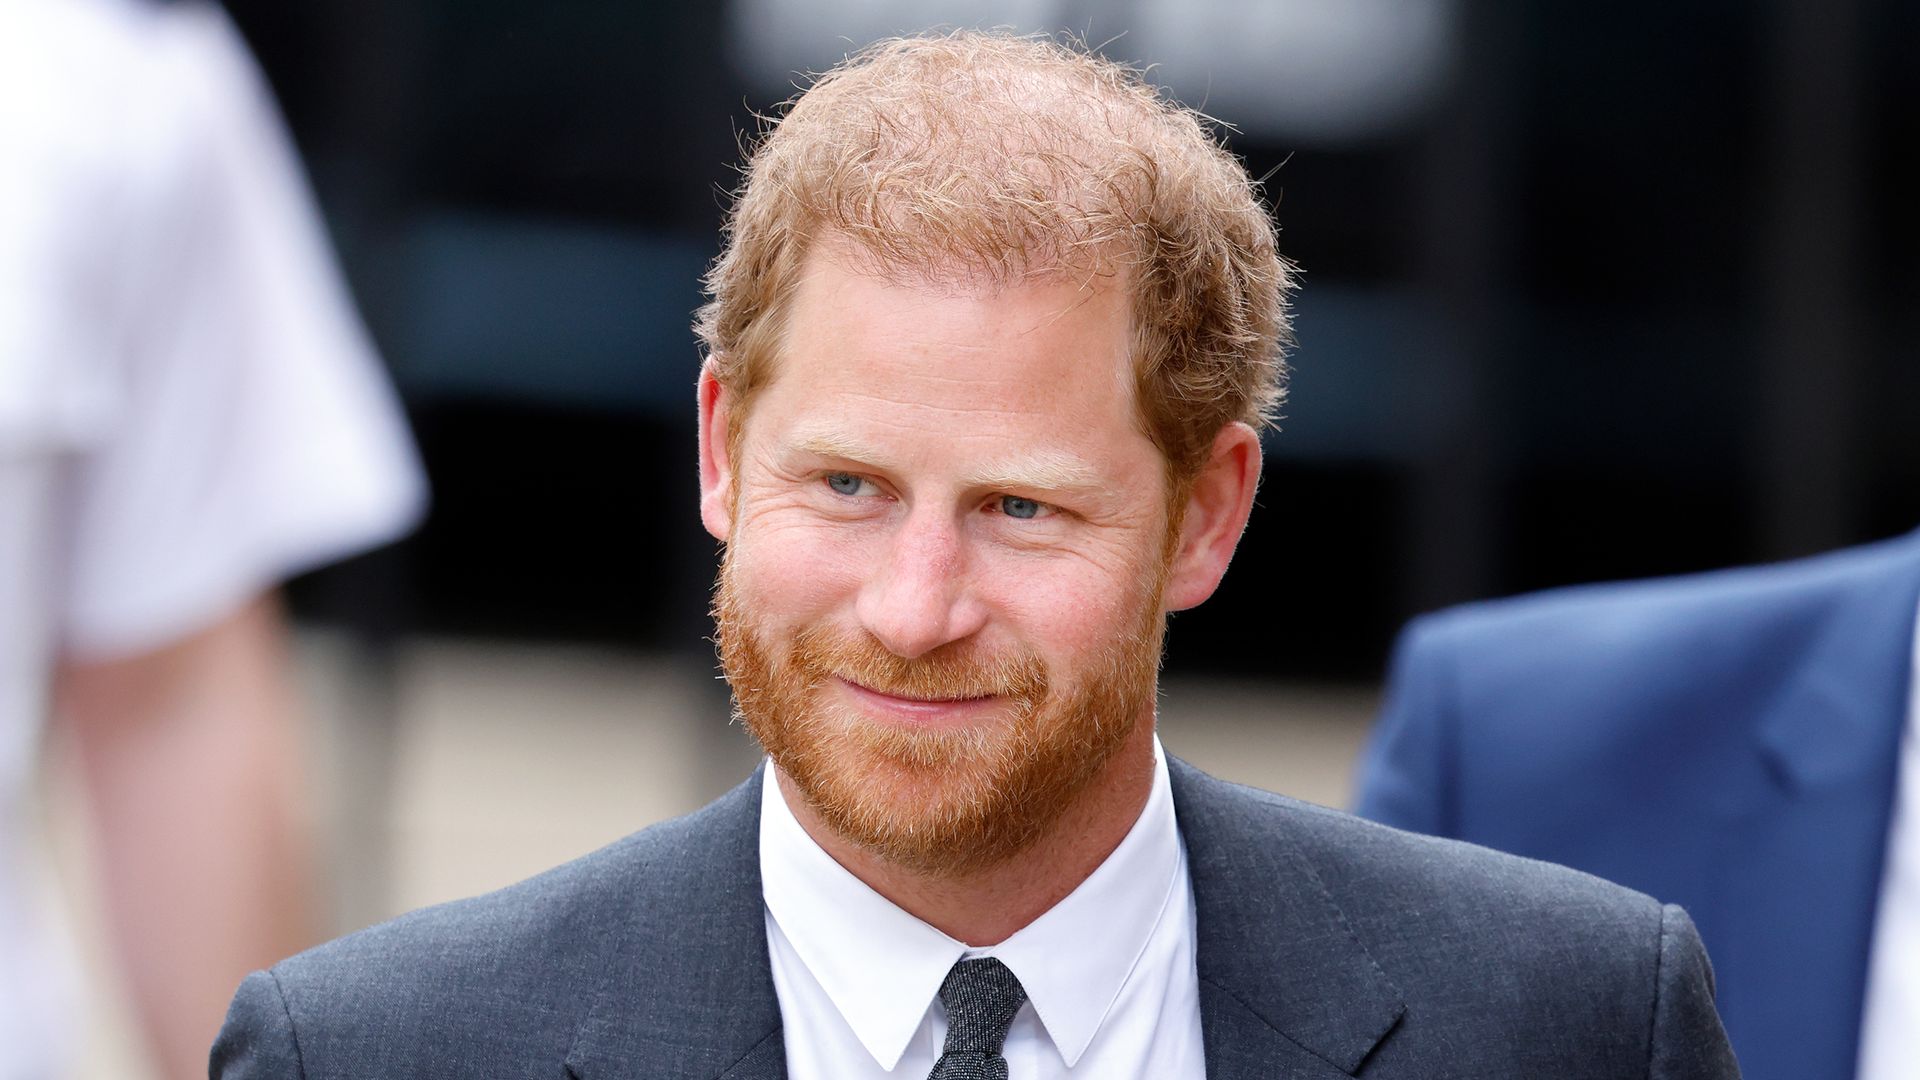 Prince Harry in a suit